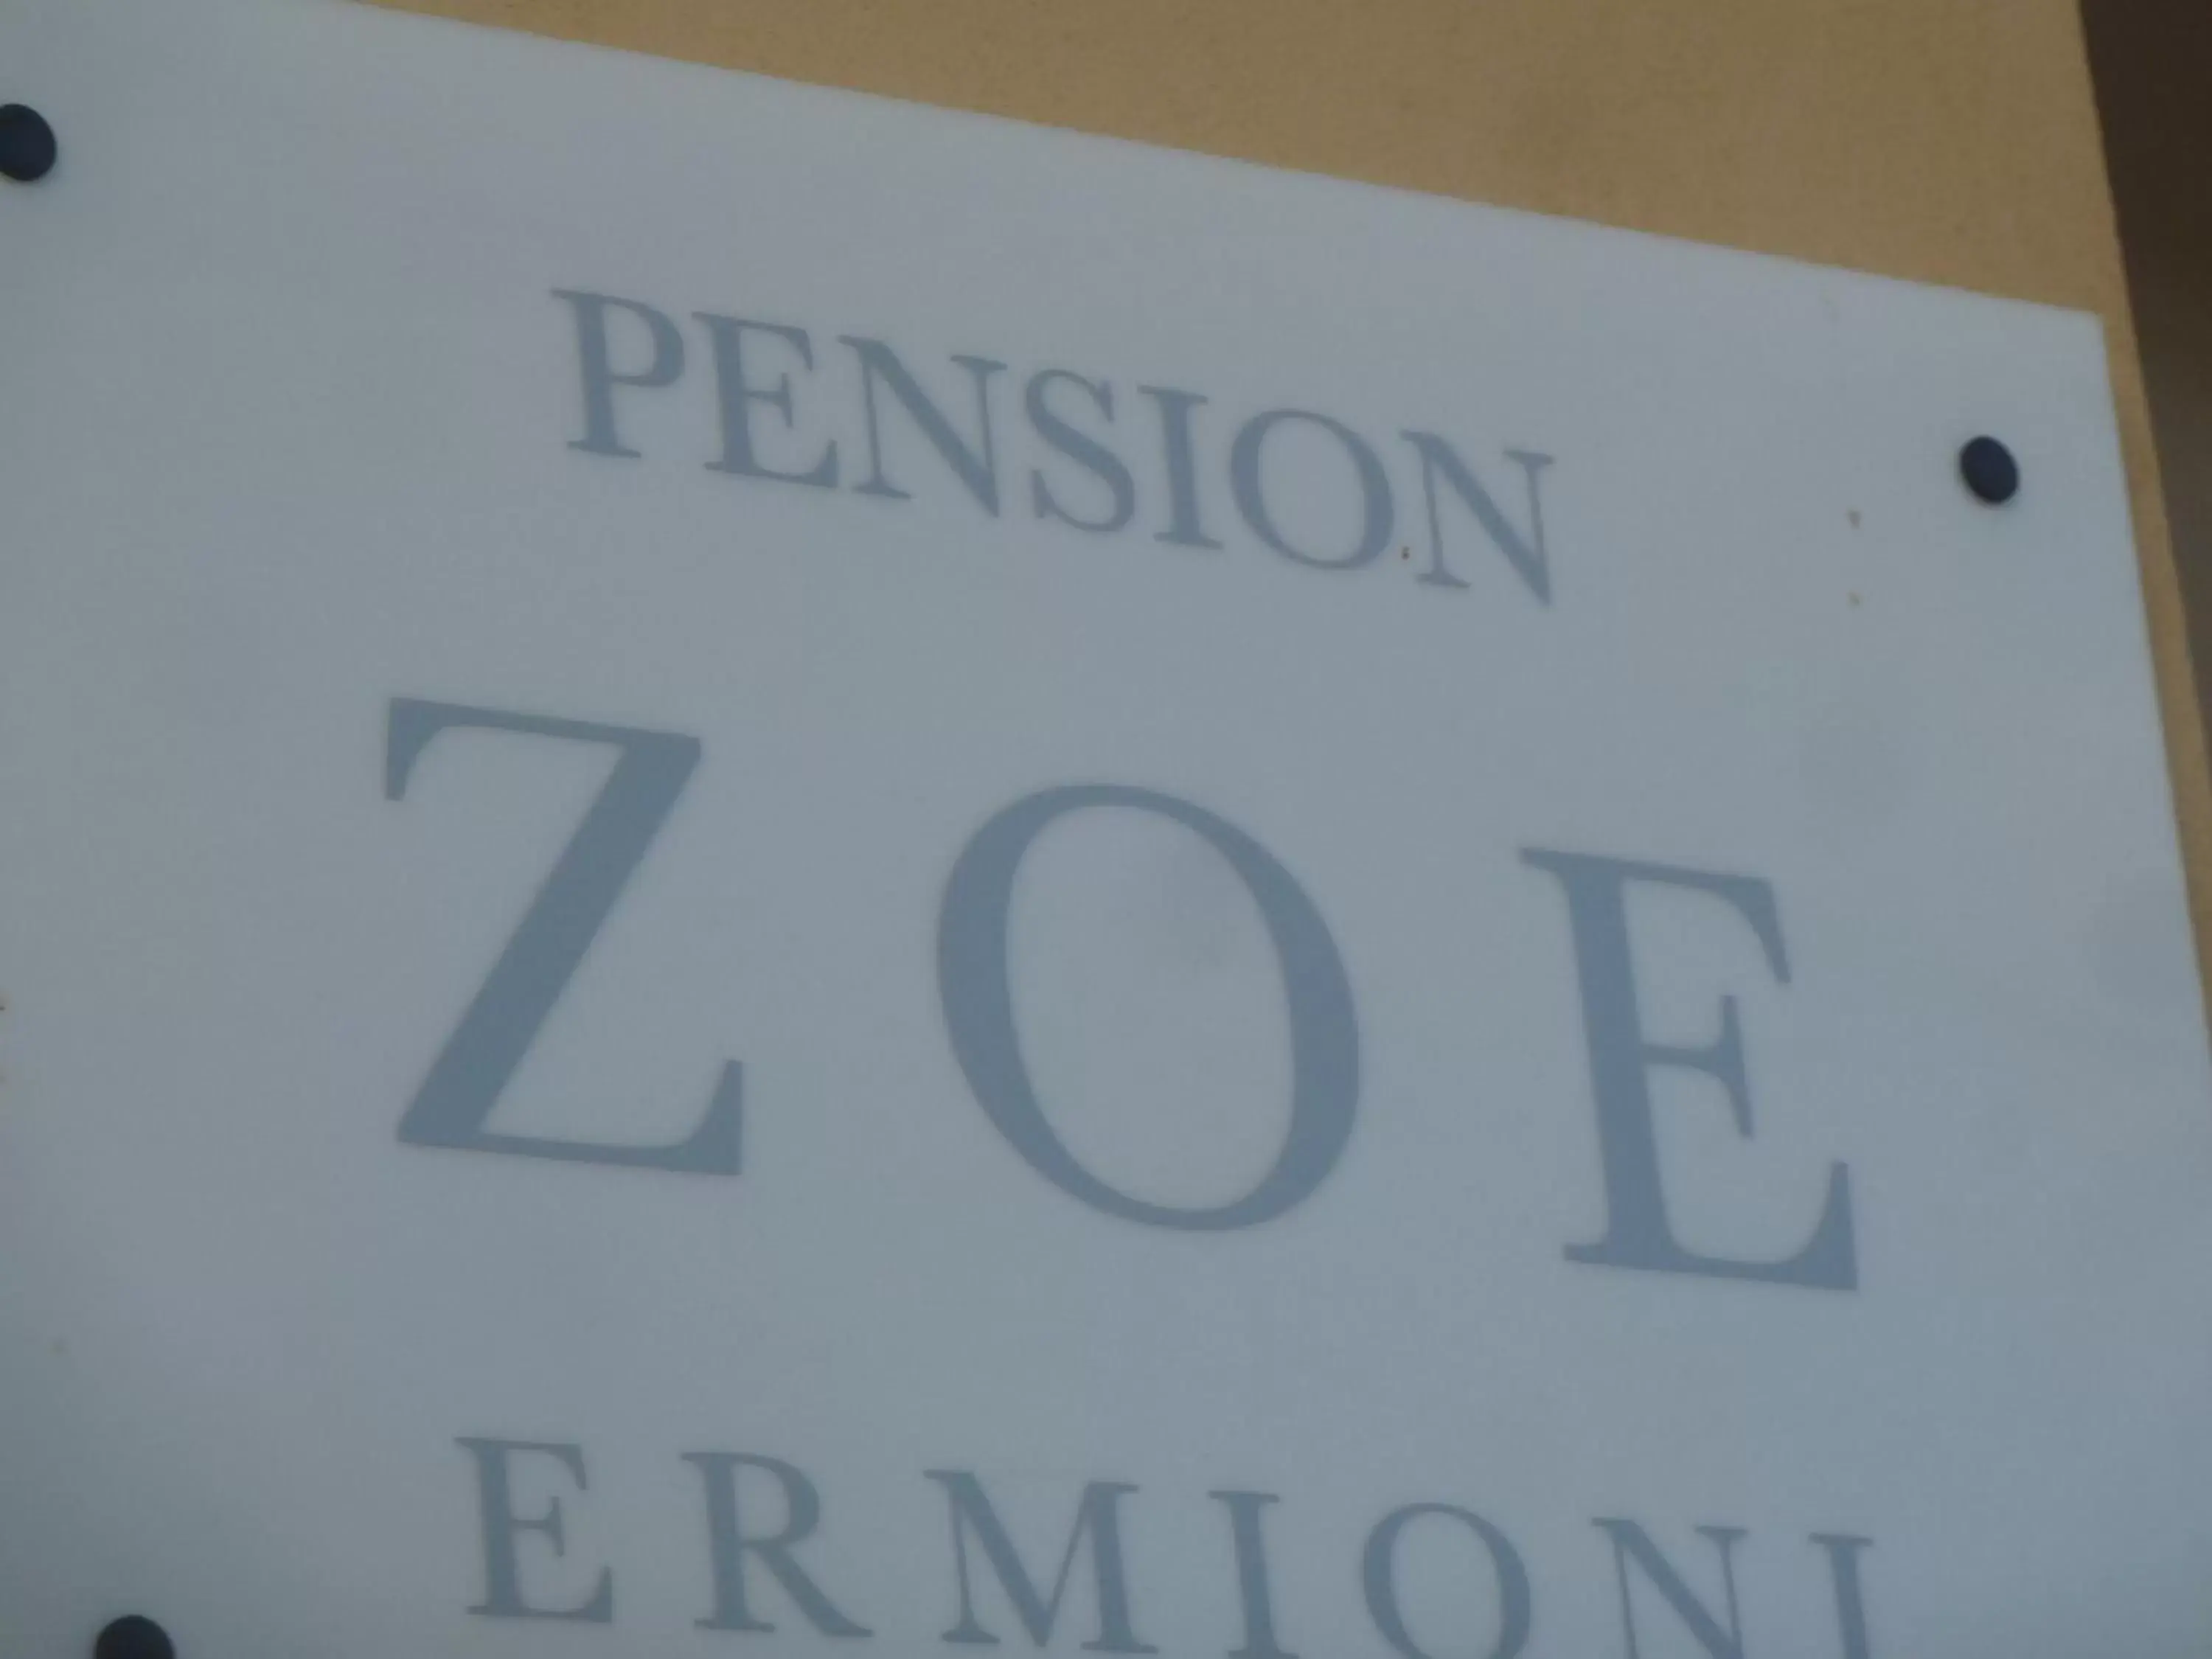 Property logo or sign in Zoe Pension